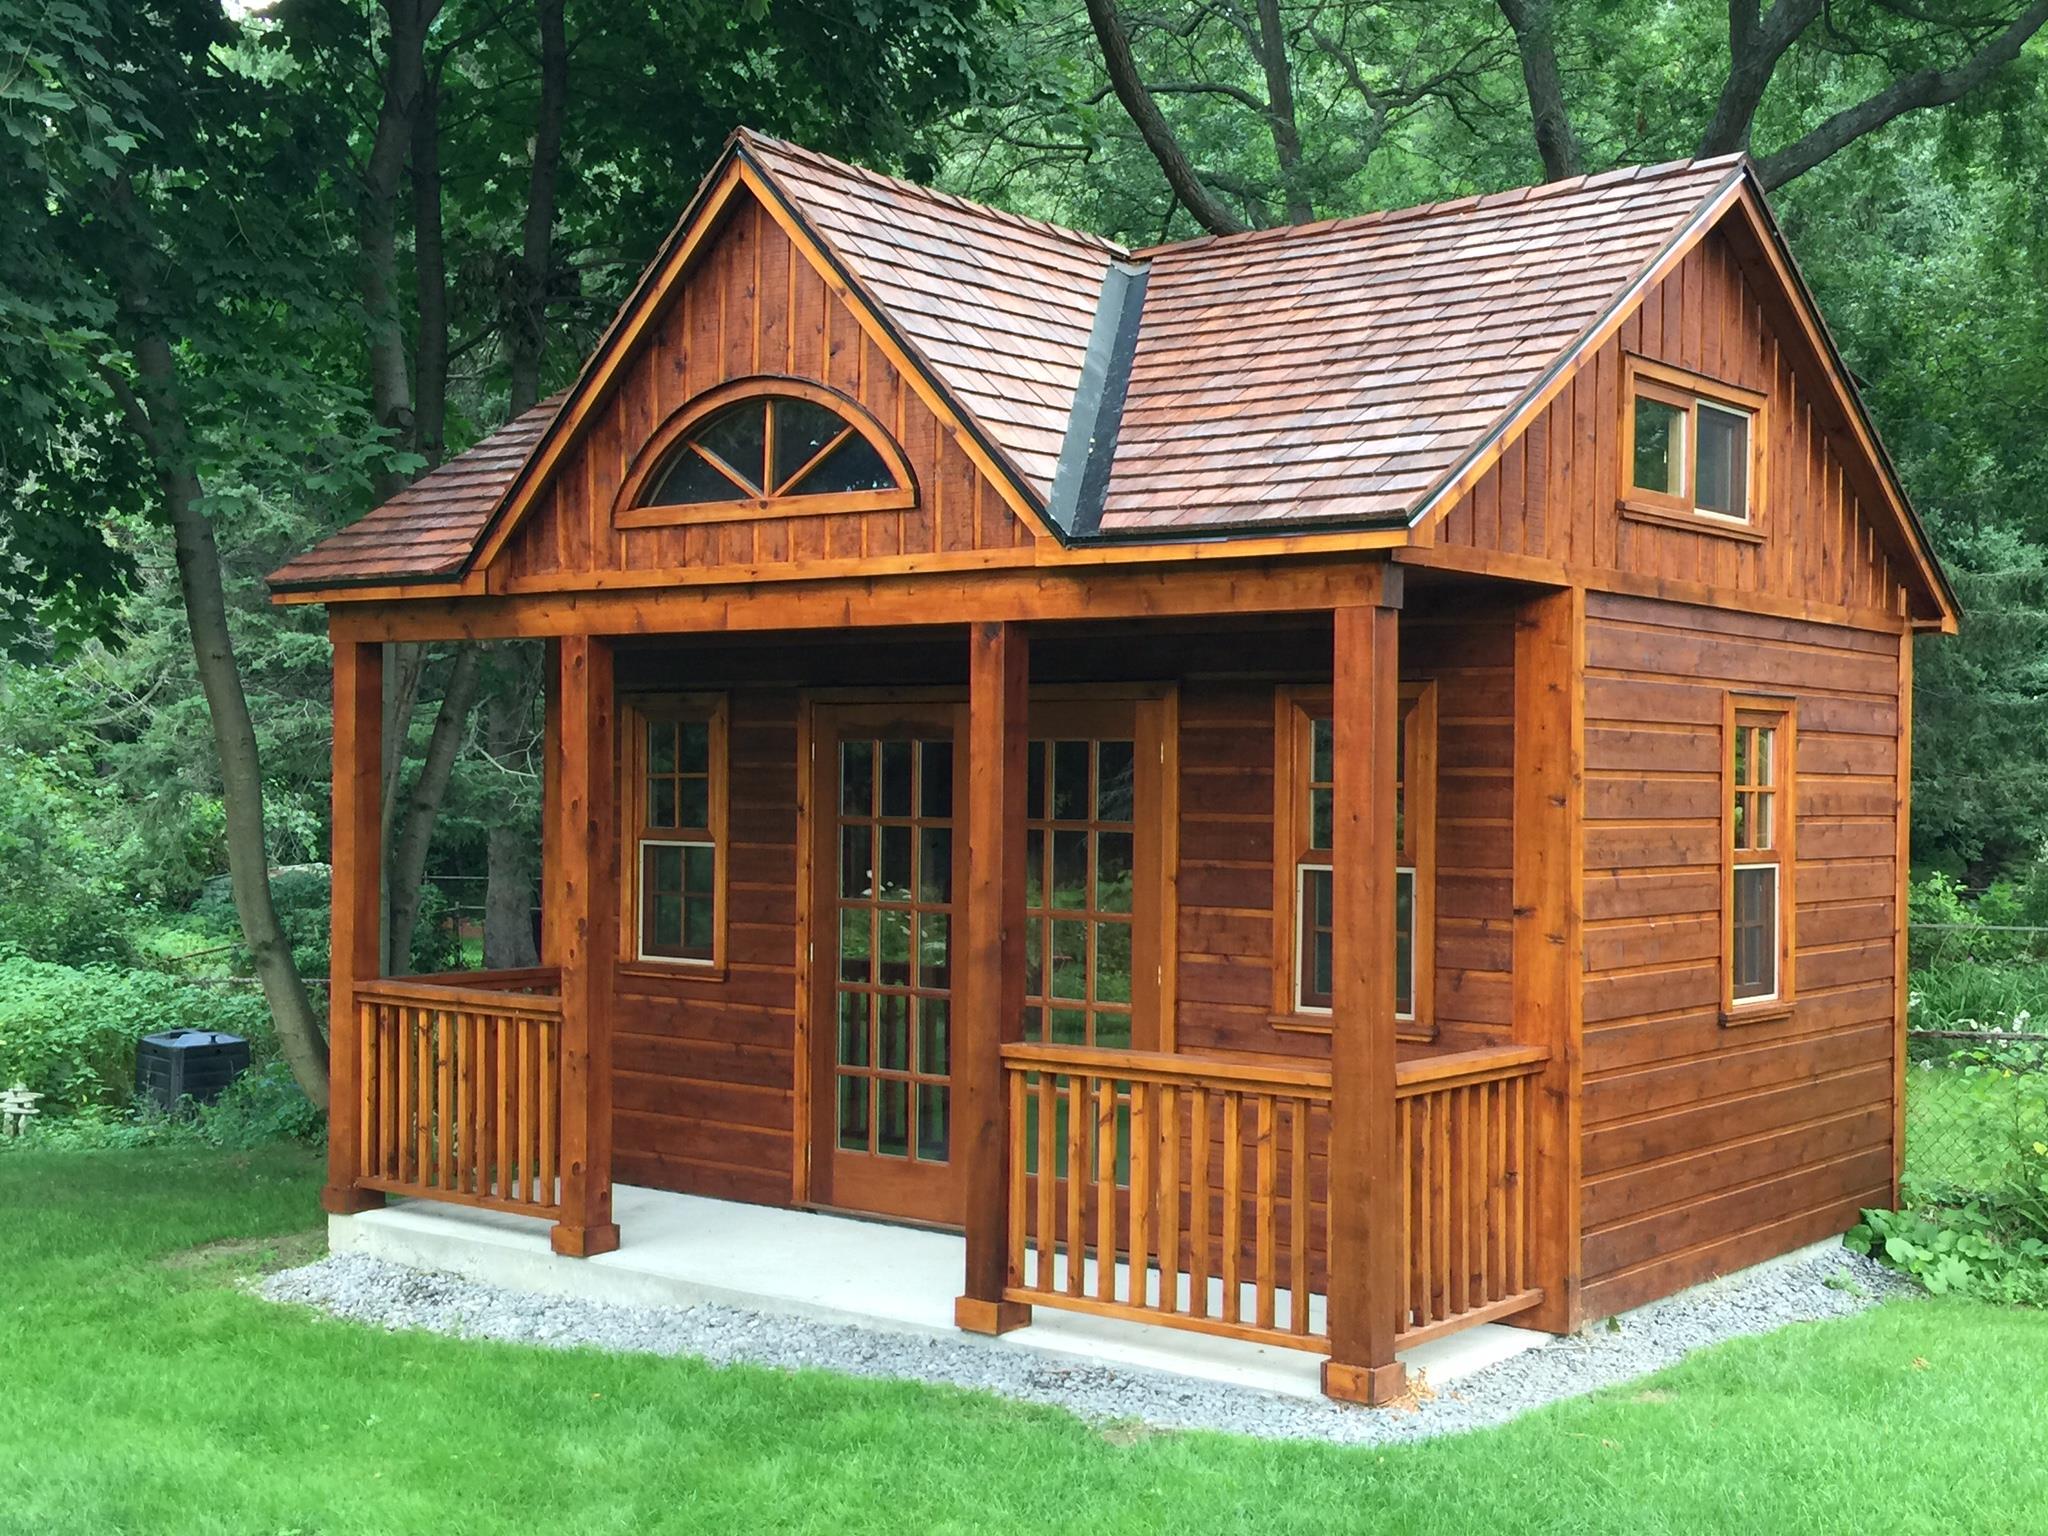 Cedar cabin kit 14x16 with french doors in Scarborough, Ontario. ID number 198036